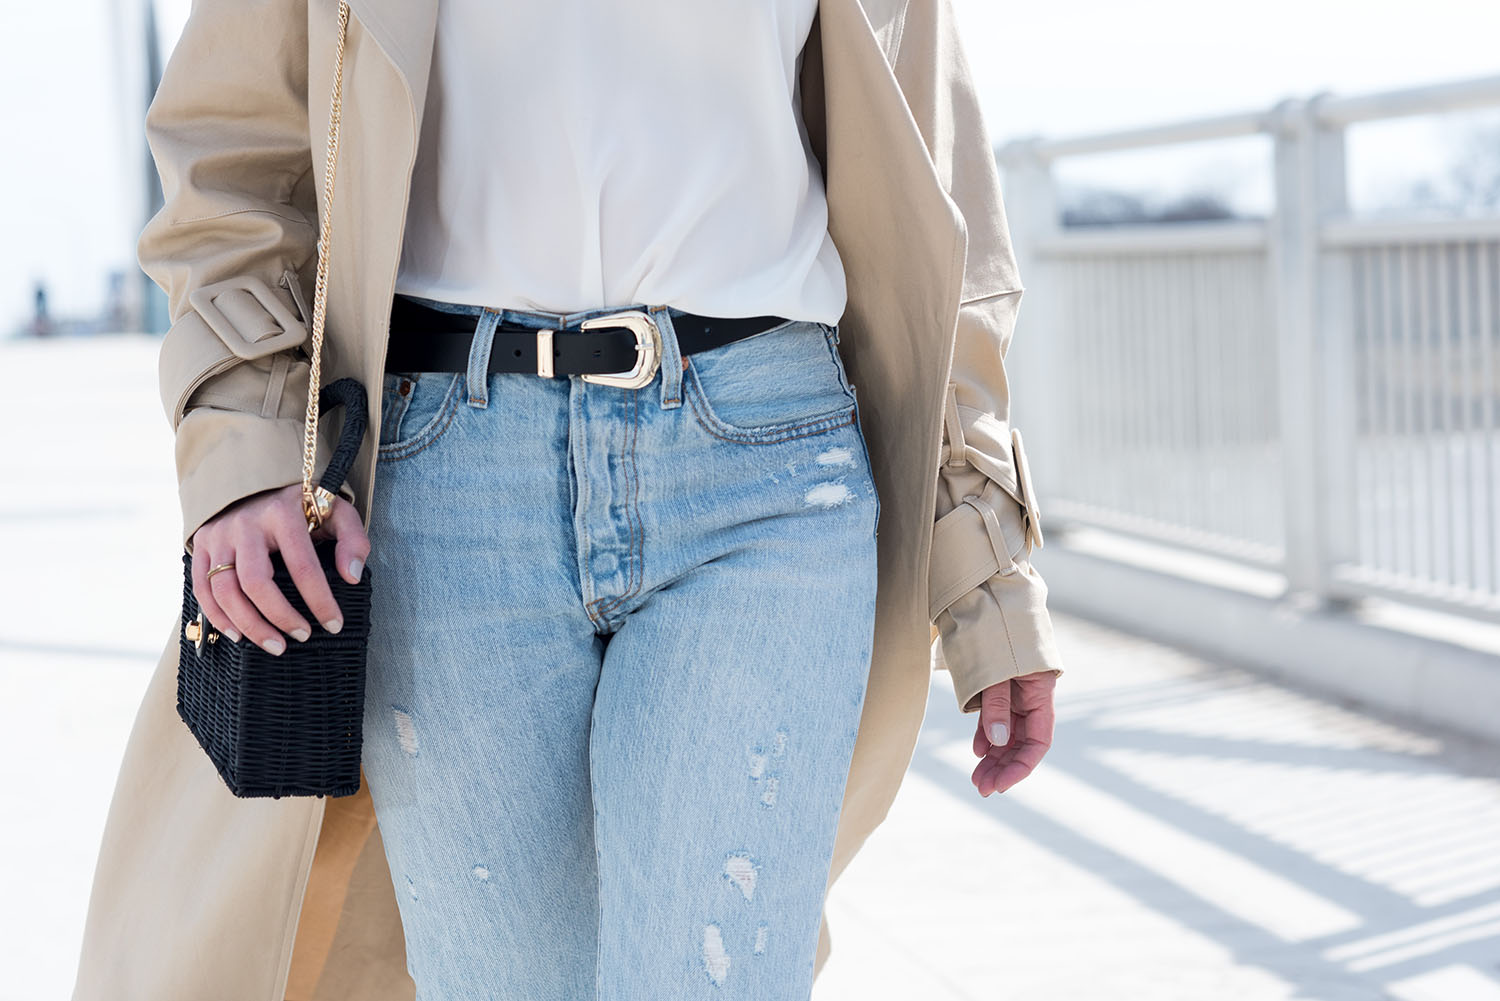 Outfit details on fashion blogger Cee Fardoe of Coco & Vera, including a Zara black leather belt and Levi's 501 jeans